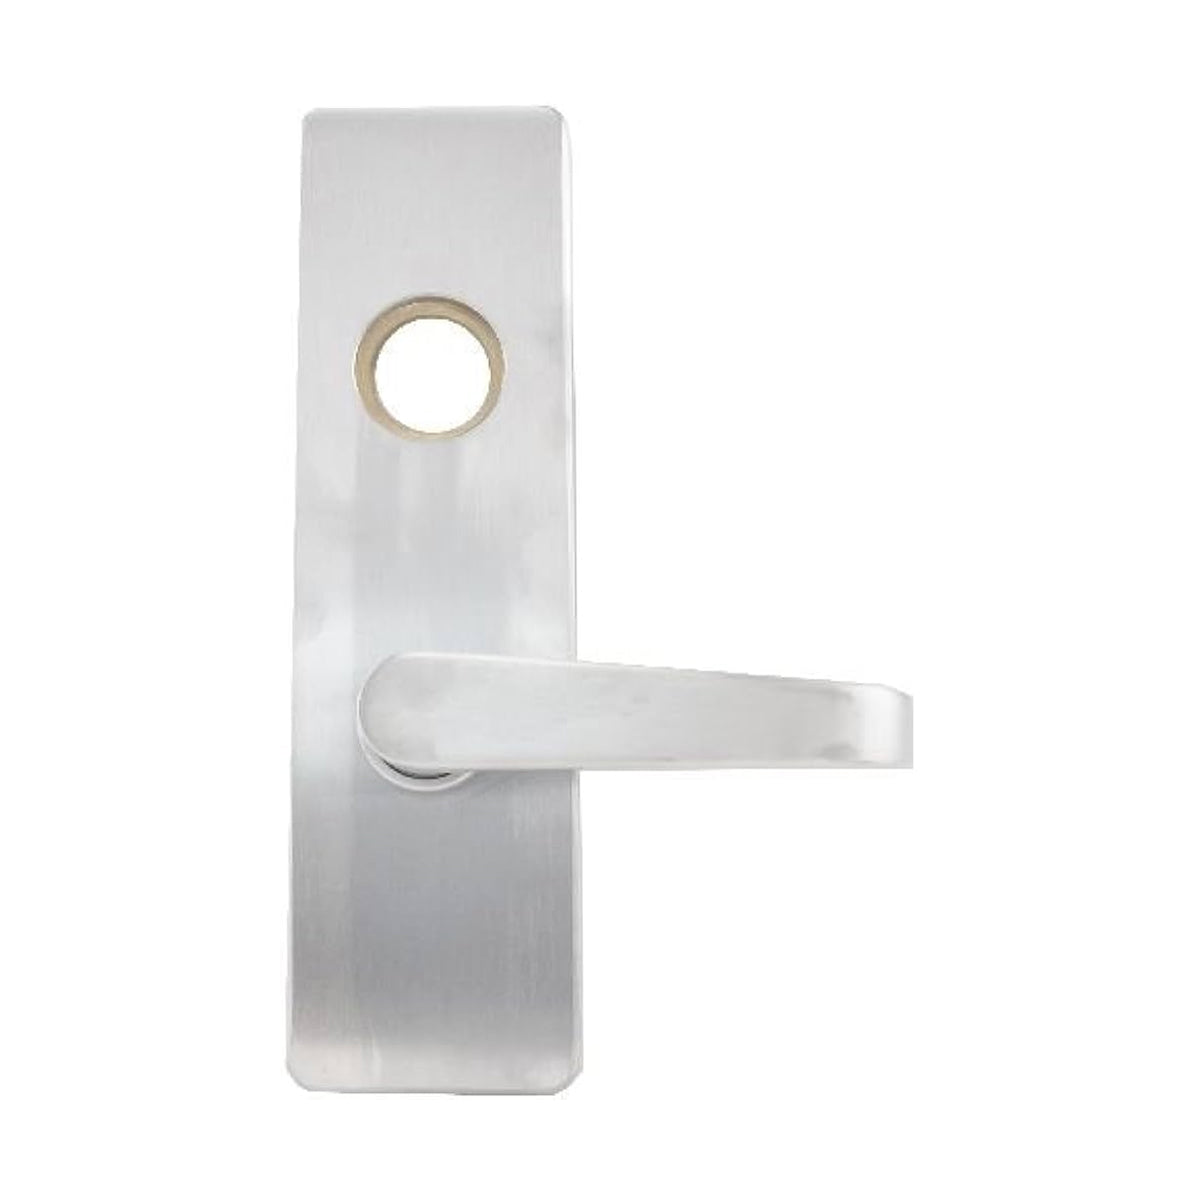 V4908A630RHR - Right Hand Reverse Key Control A Lever Trim Satin Stainless Steel Finish